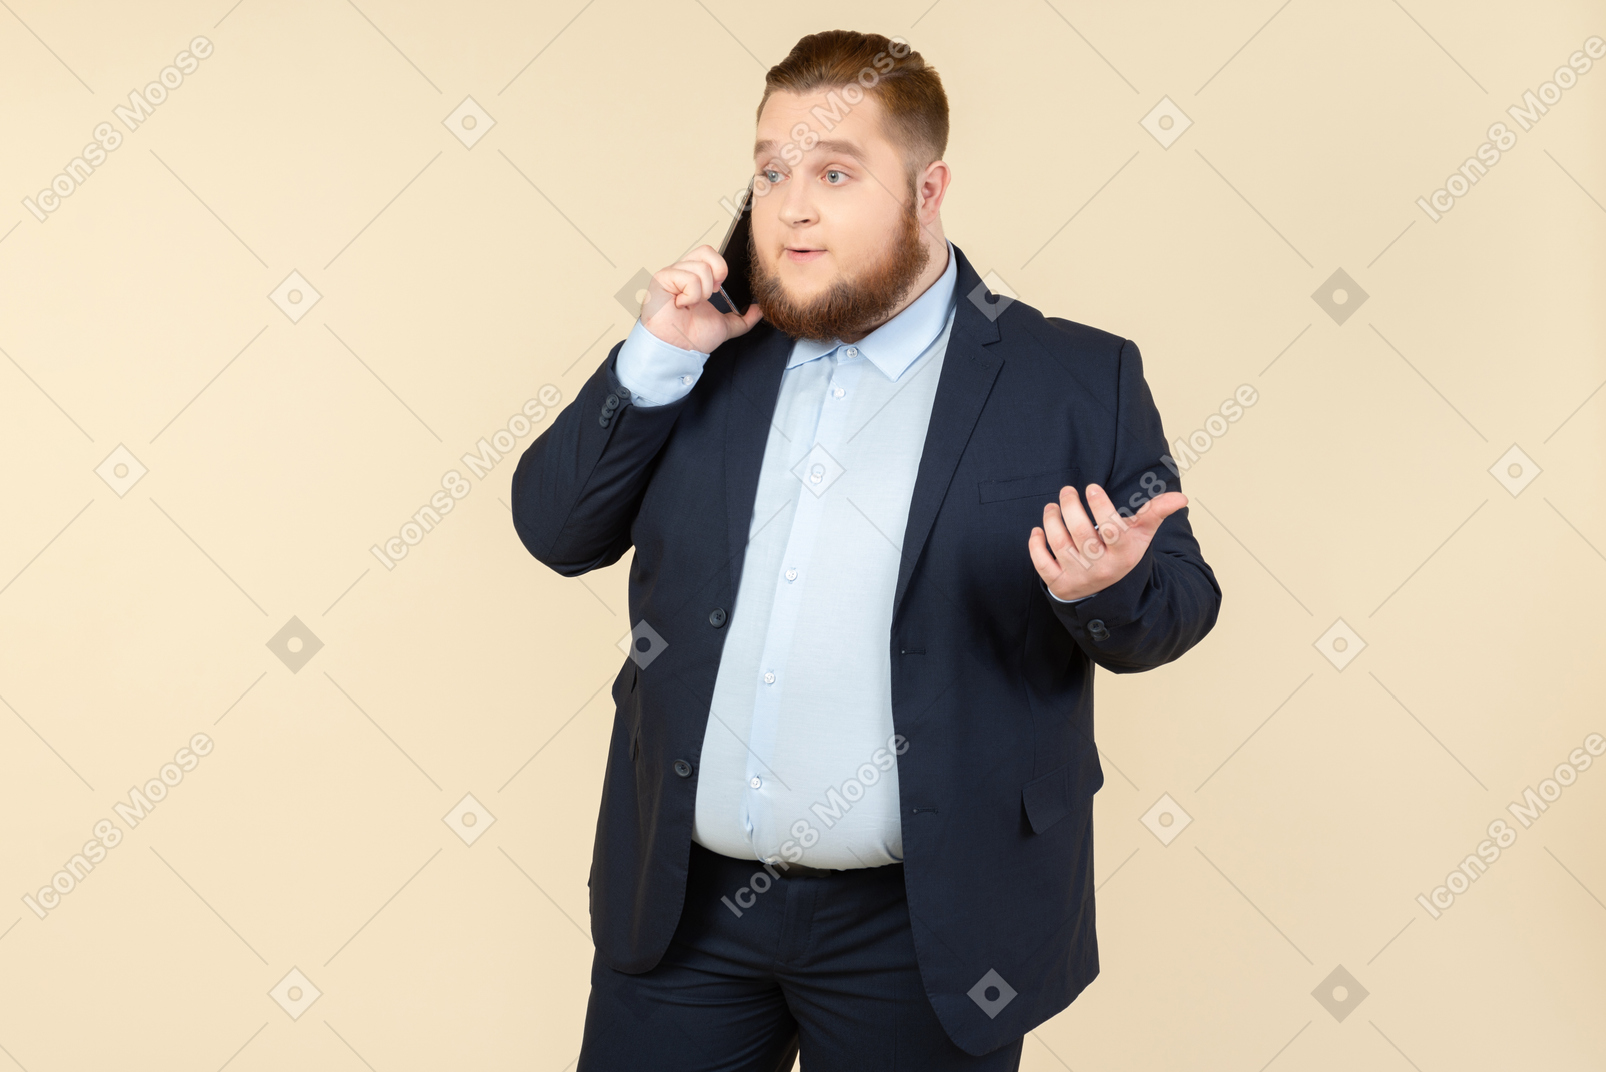 Surprised young overweight office worker talking on the phone